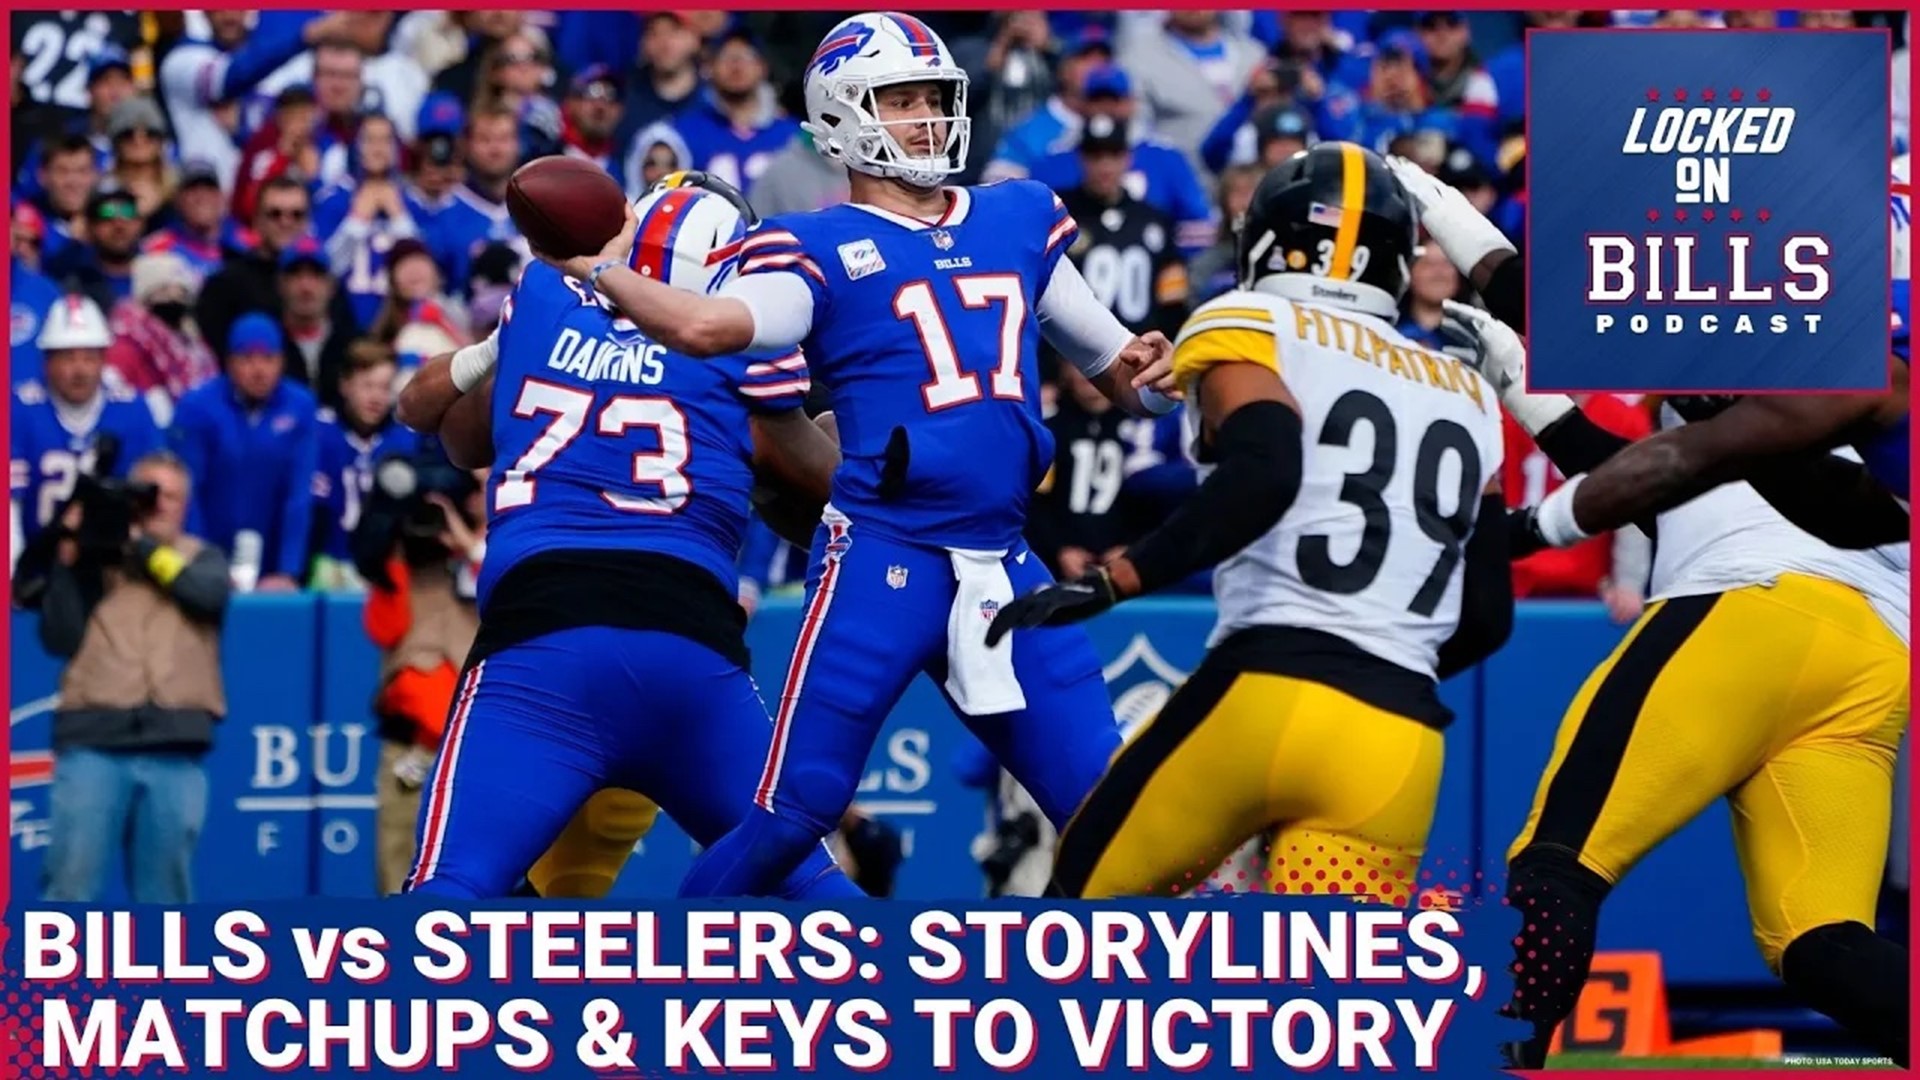 The Buffalo Bills are at home for the Super Wild Card round of the NFL Playoffs to host the Pittsburgh Steelers.